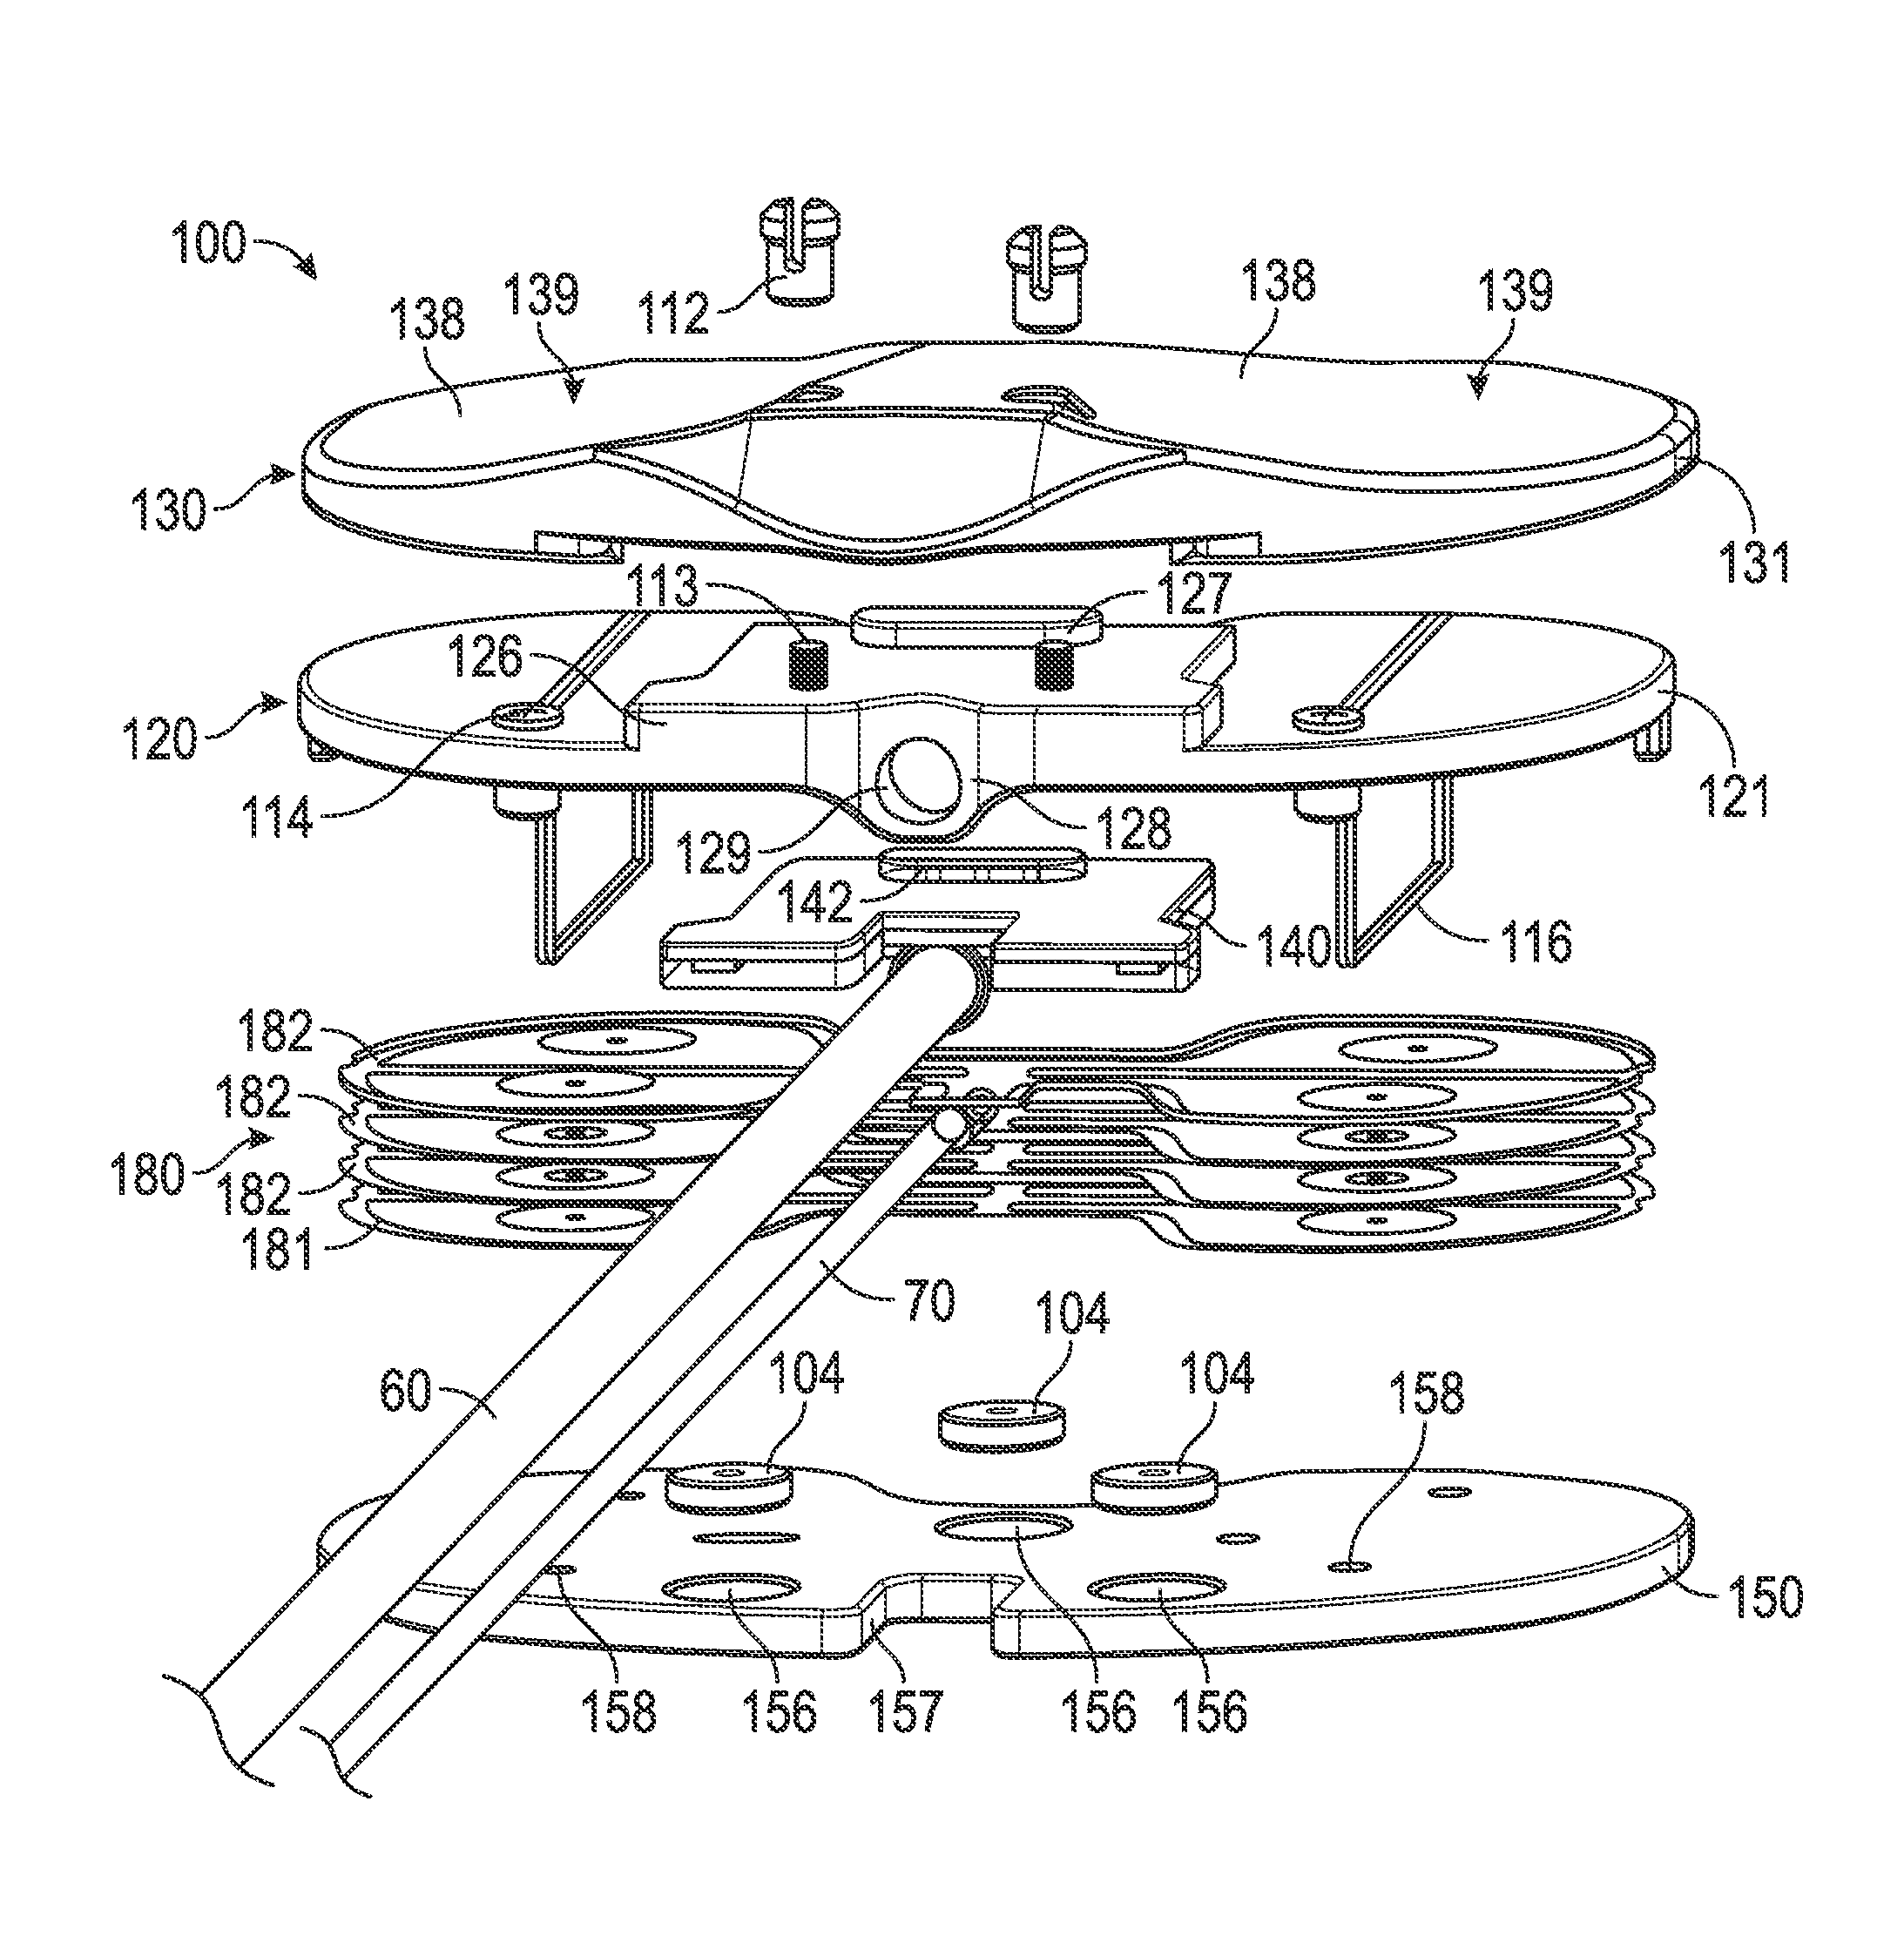 Actuated positioning device for arthroplasty and methods of use